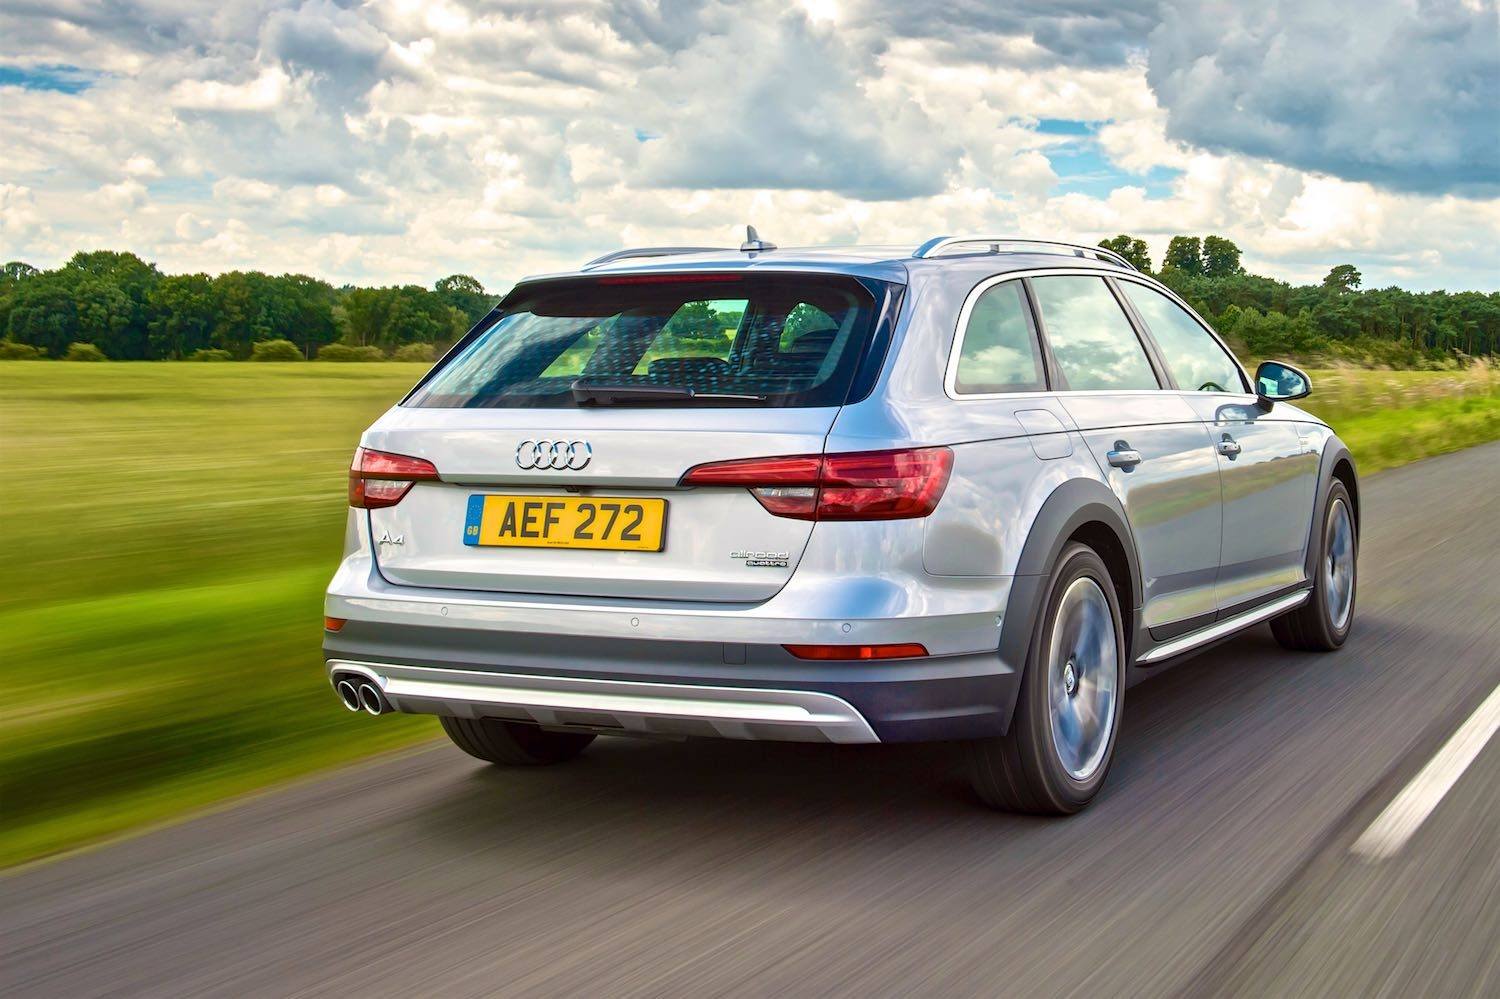 2016 Audi A4 allroad quattro reviewed by Tom Scanlan for Drive